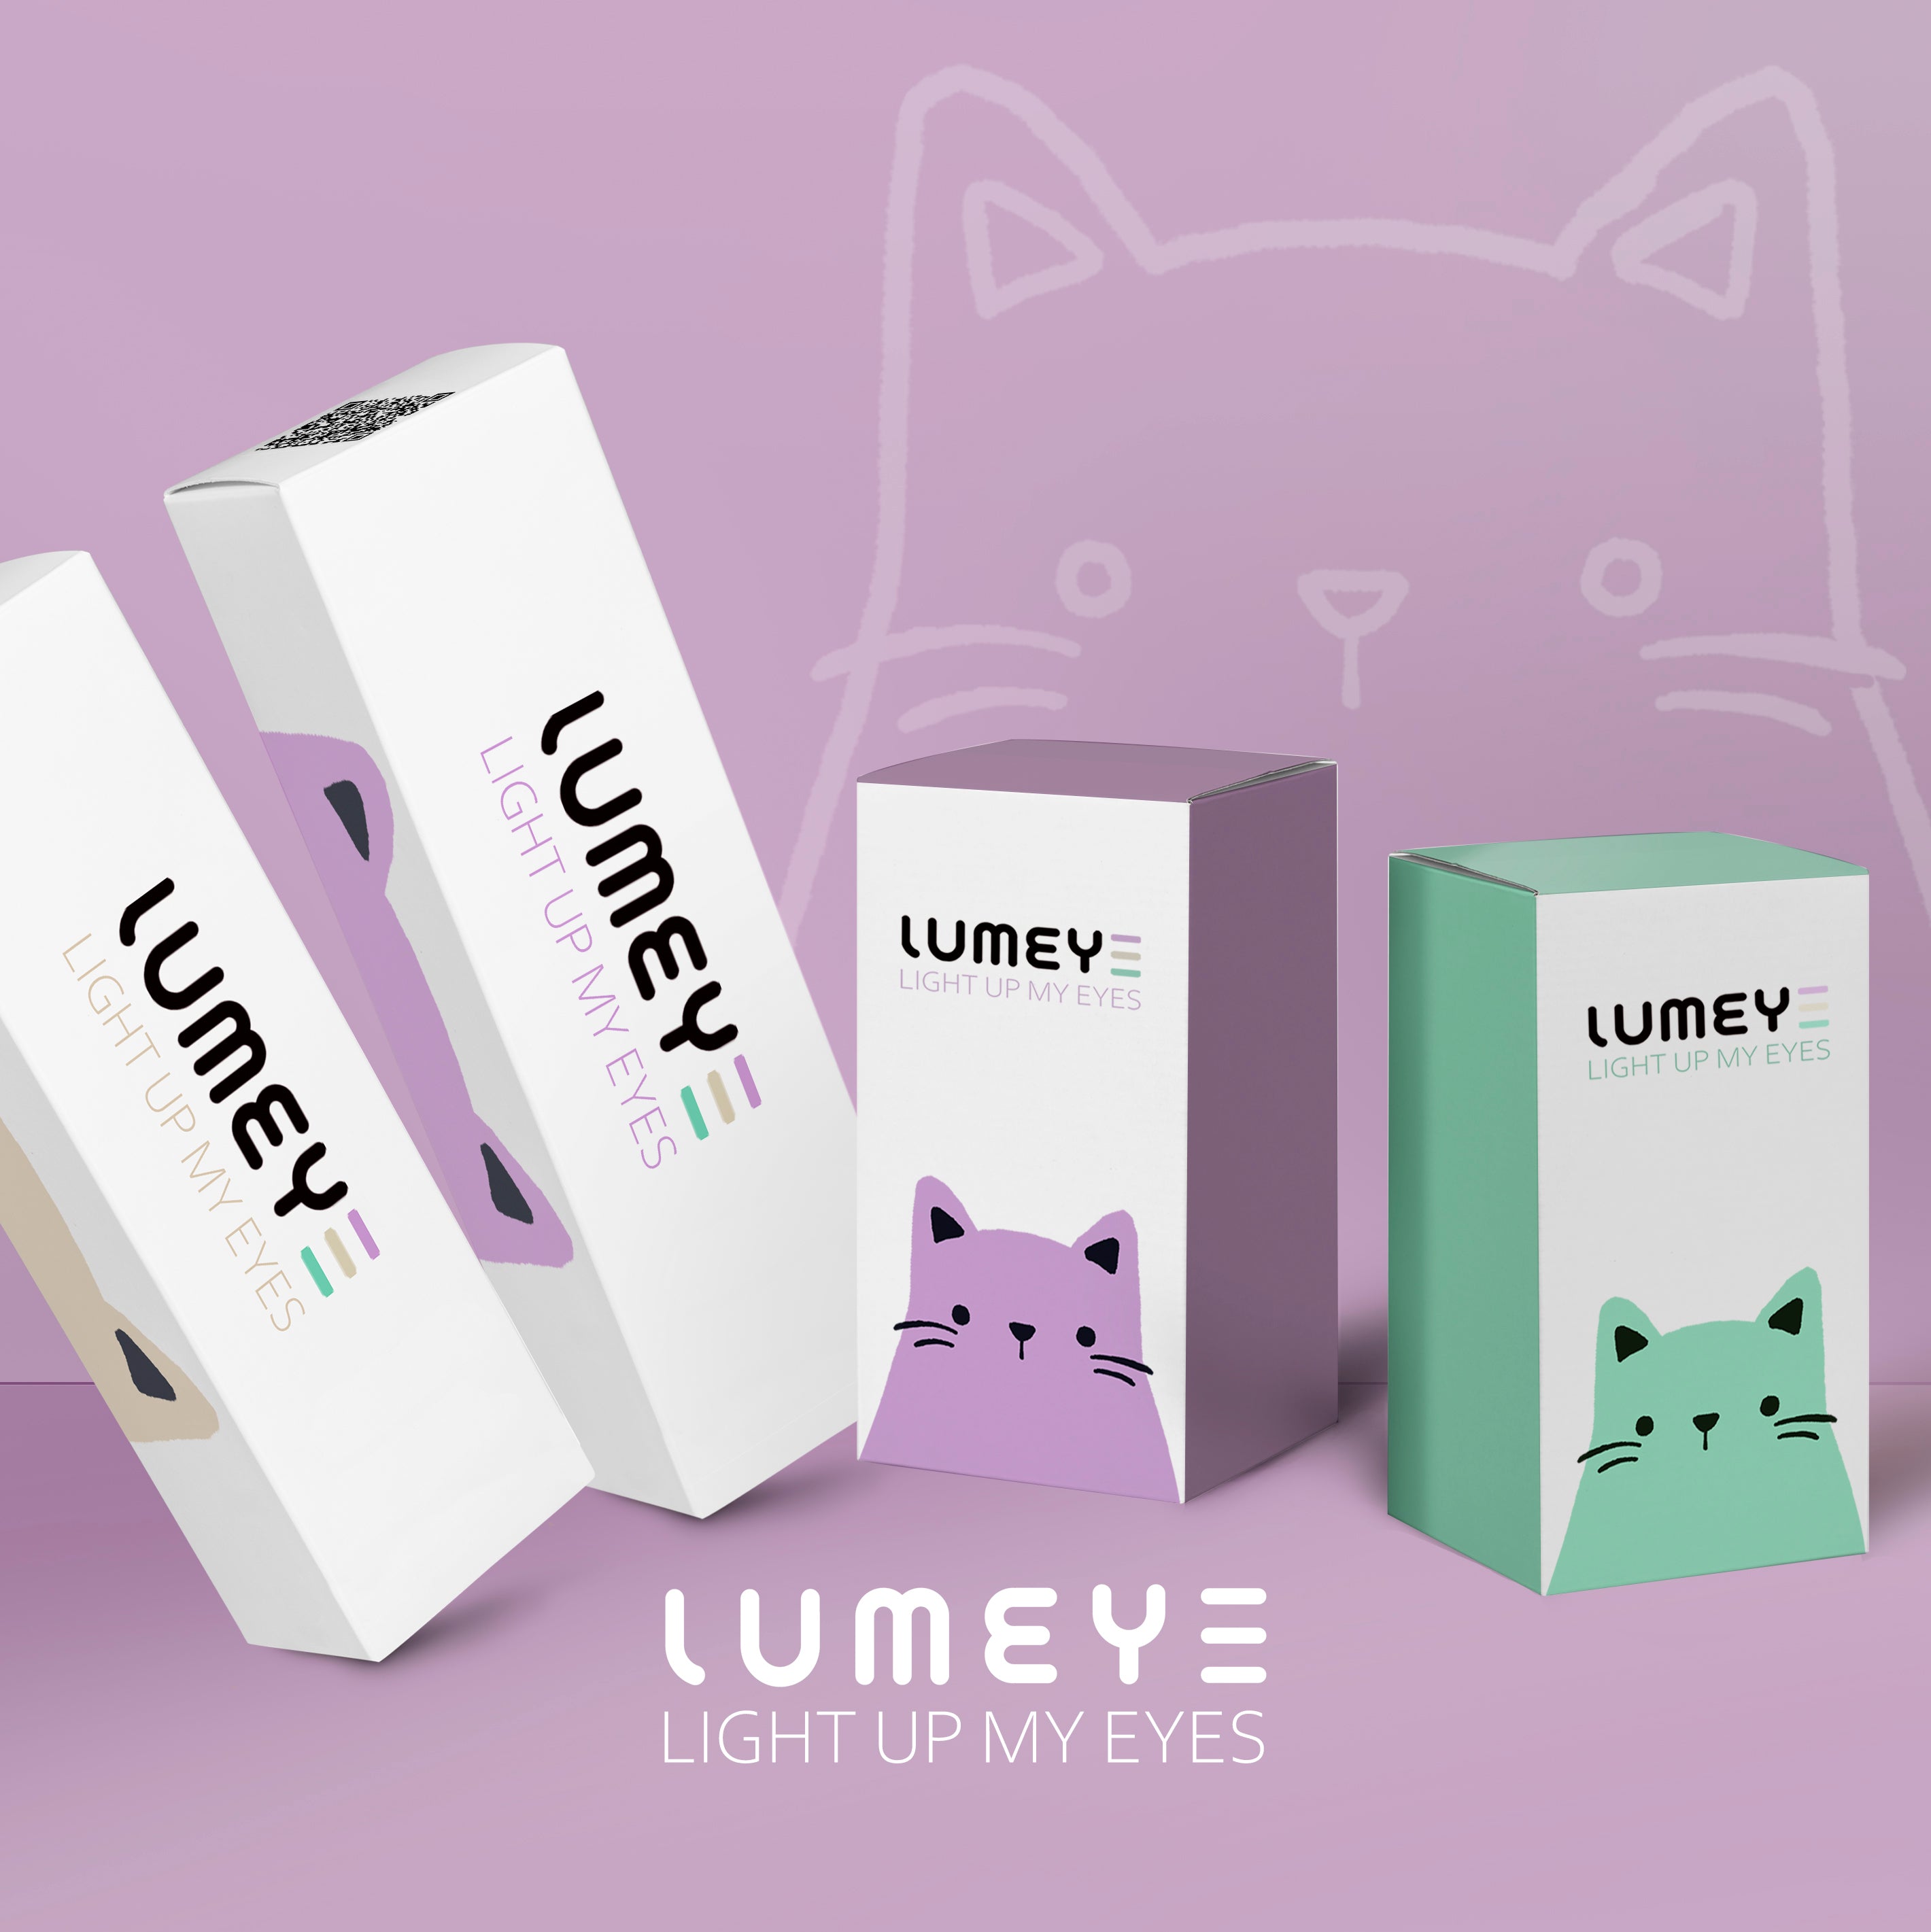 Best COLORED CONTACTS - LUMEYE Dreamy Galaxy Pink Colored Contact Lenses - LUMEYE